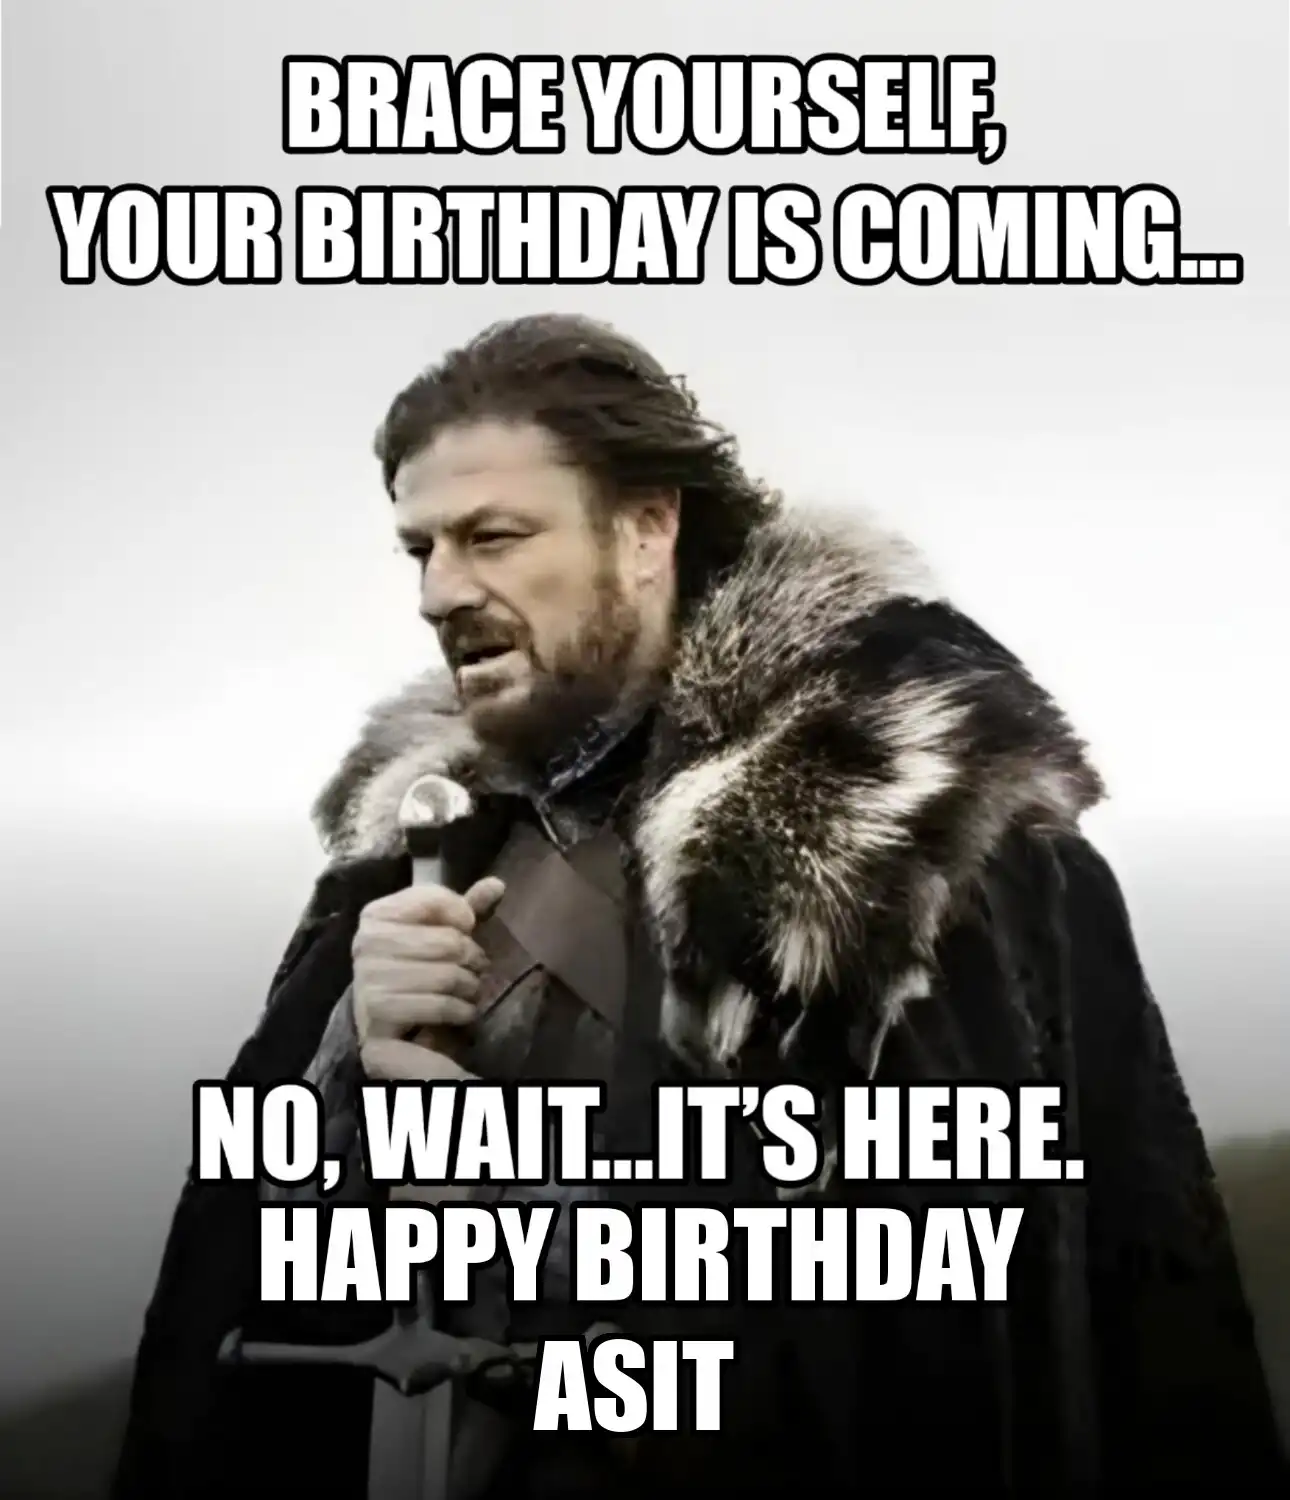 Happy Birthday Asit Brace Yourself Your Birthday Is Coming Meme